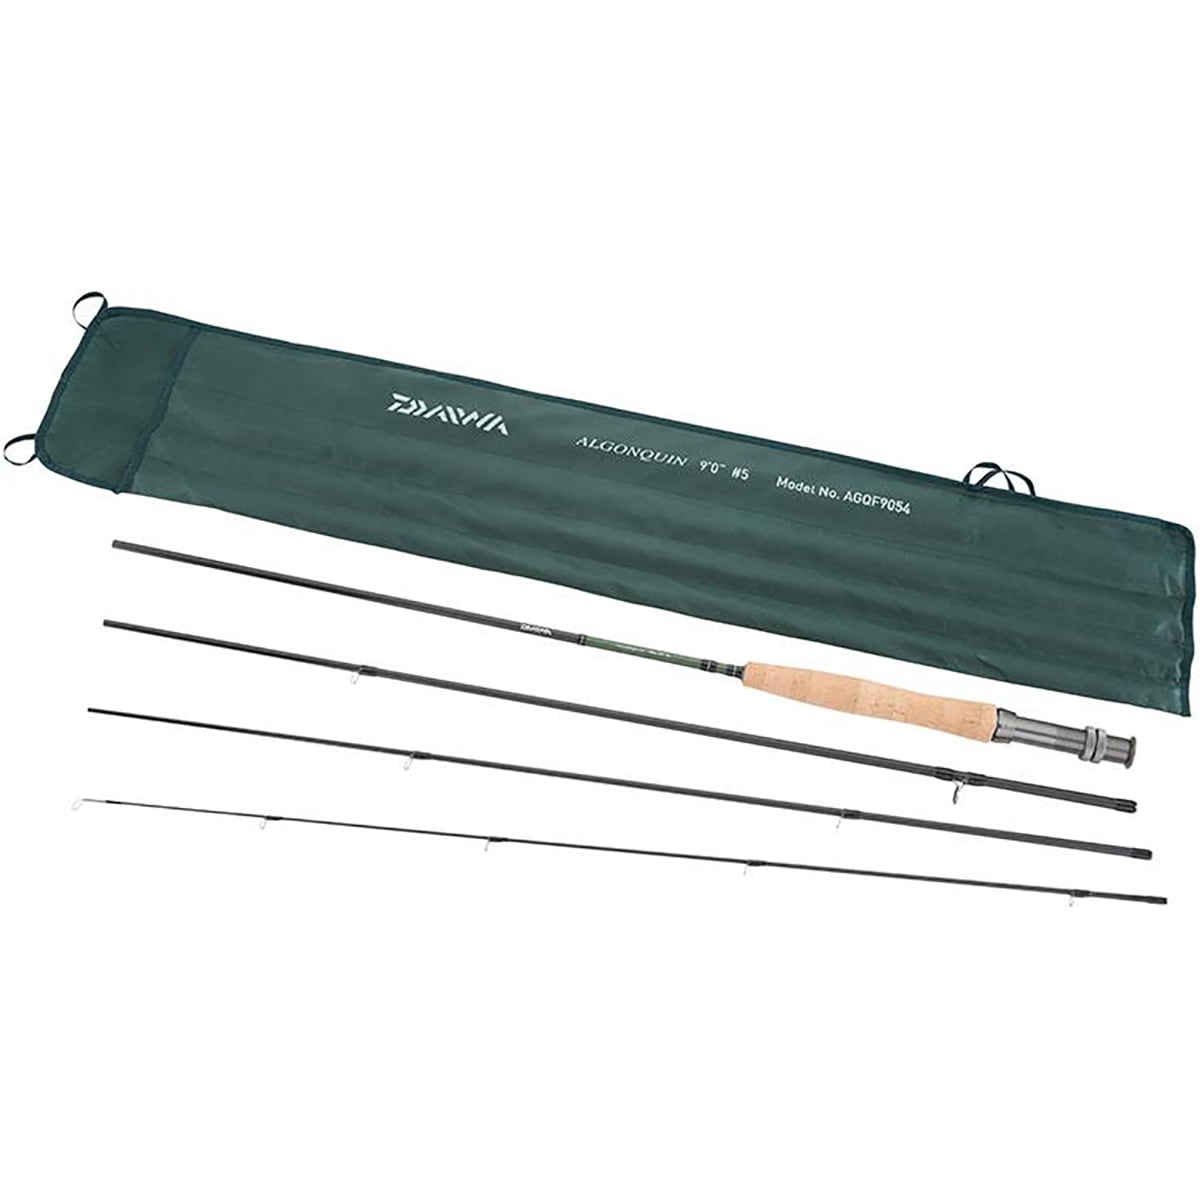 Crystal River River Cahill 8' 6" Graphite CH-685 Fly Rod 2Piece 